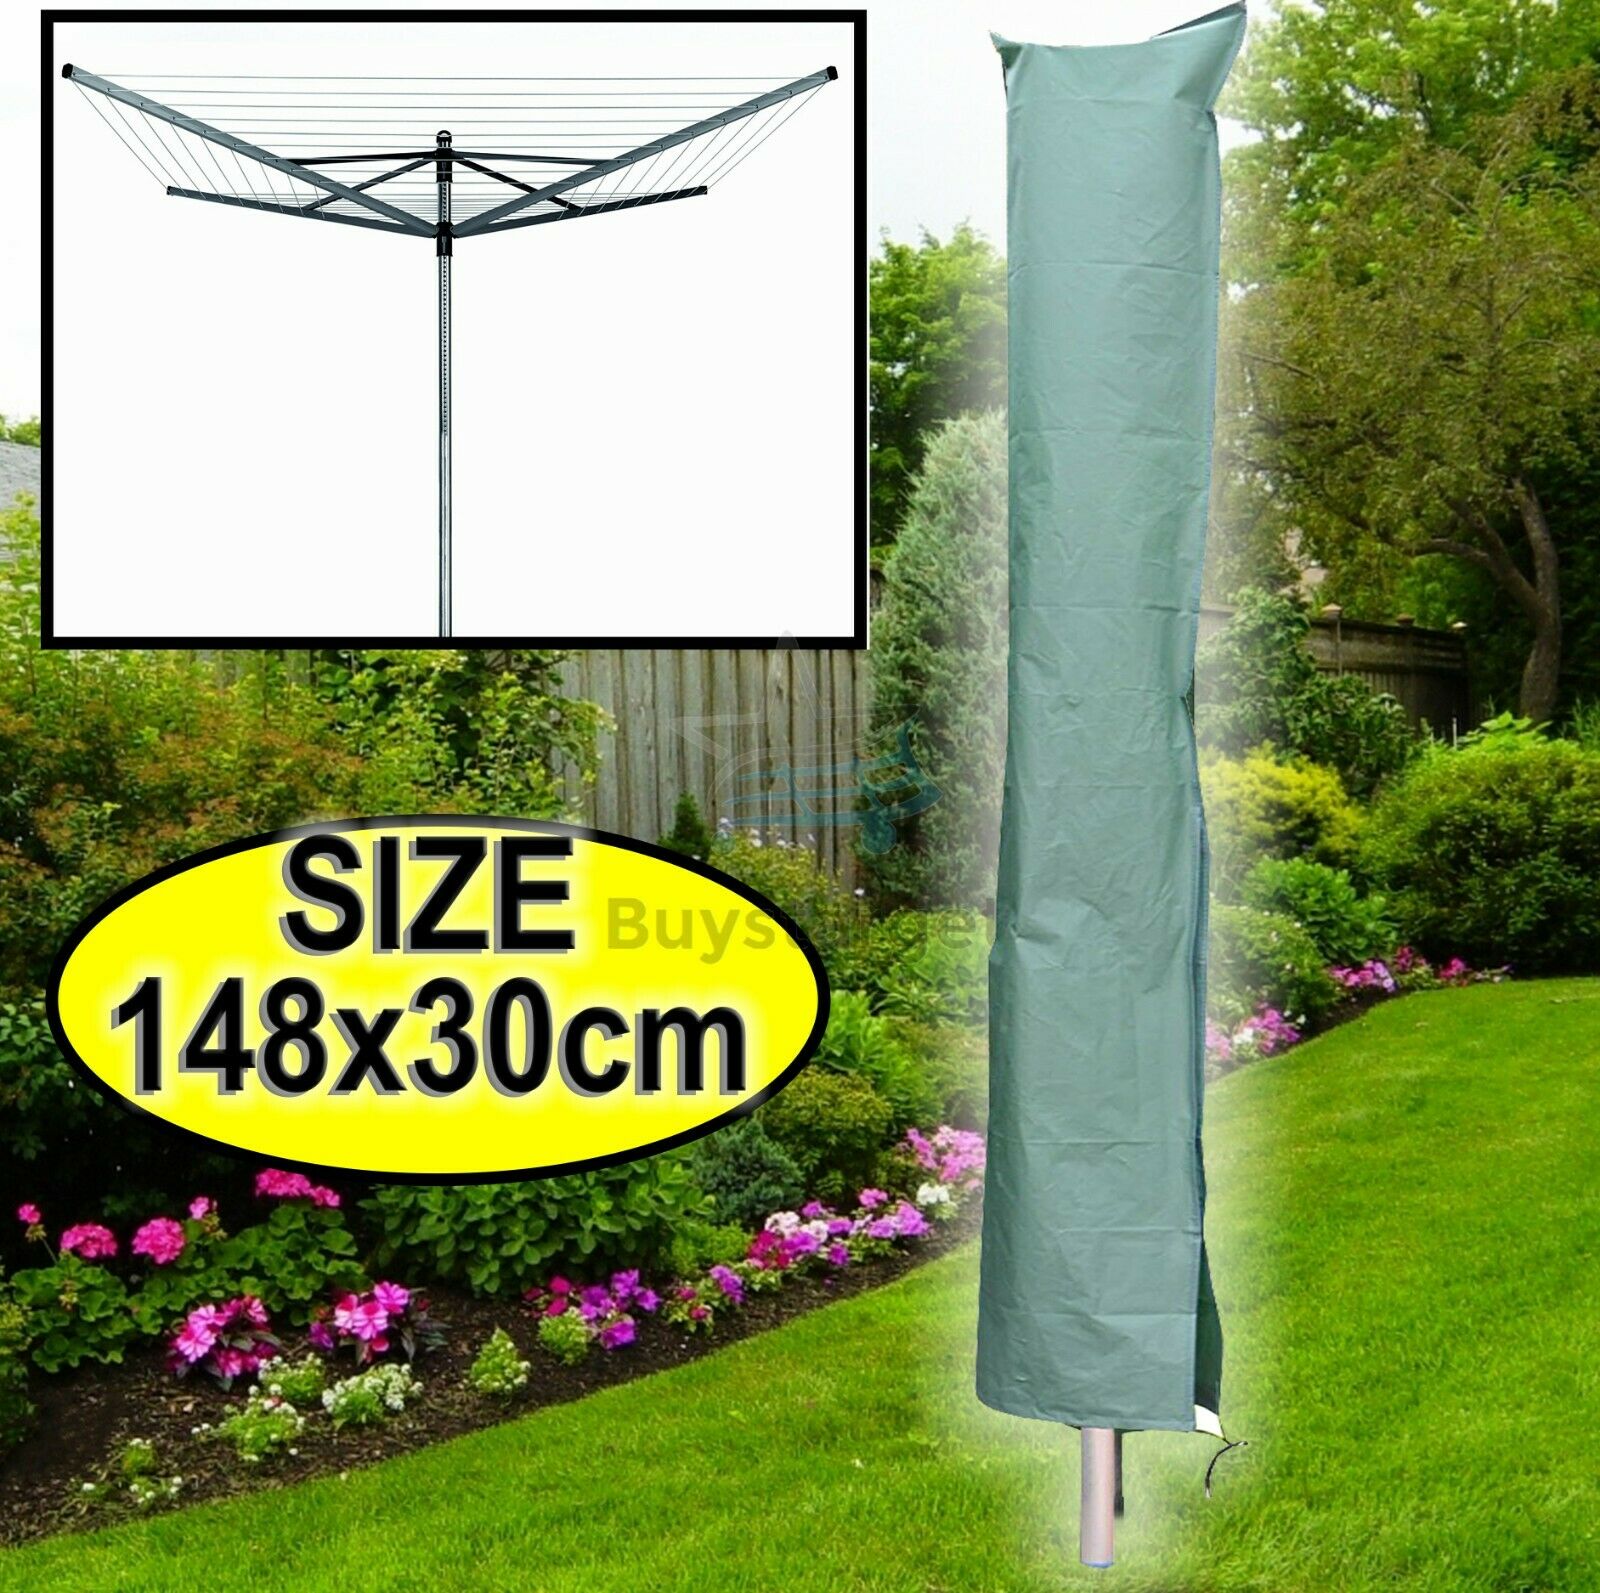 Waterproof Rotary Washing Line Cover Clothes Airer Garden Parasol